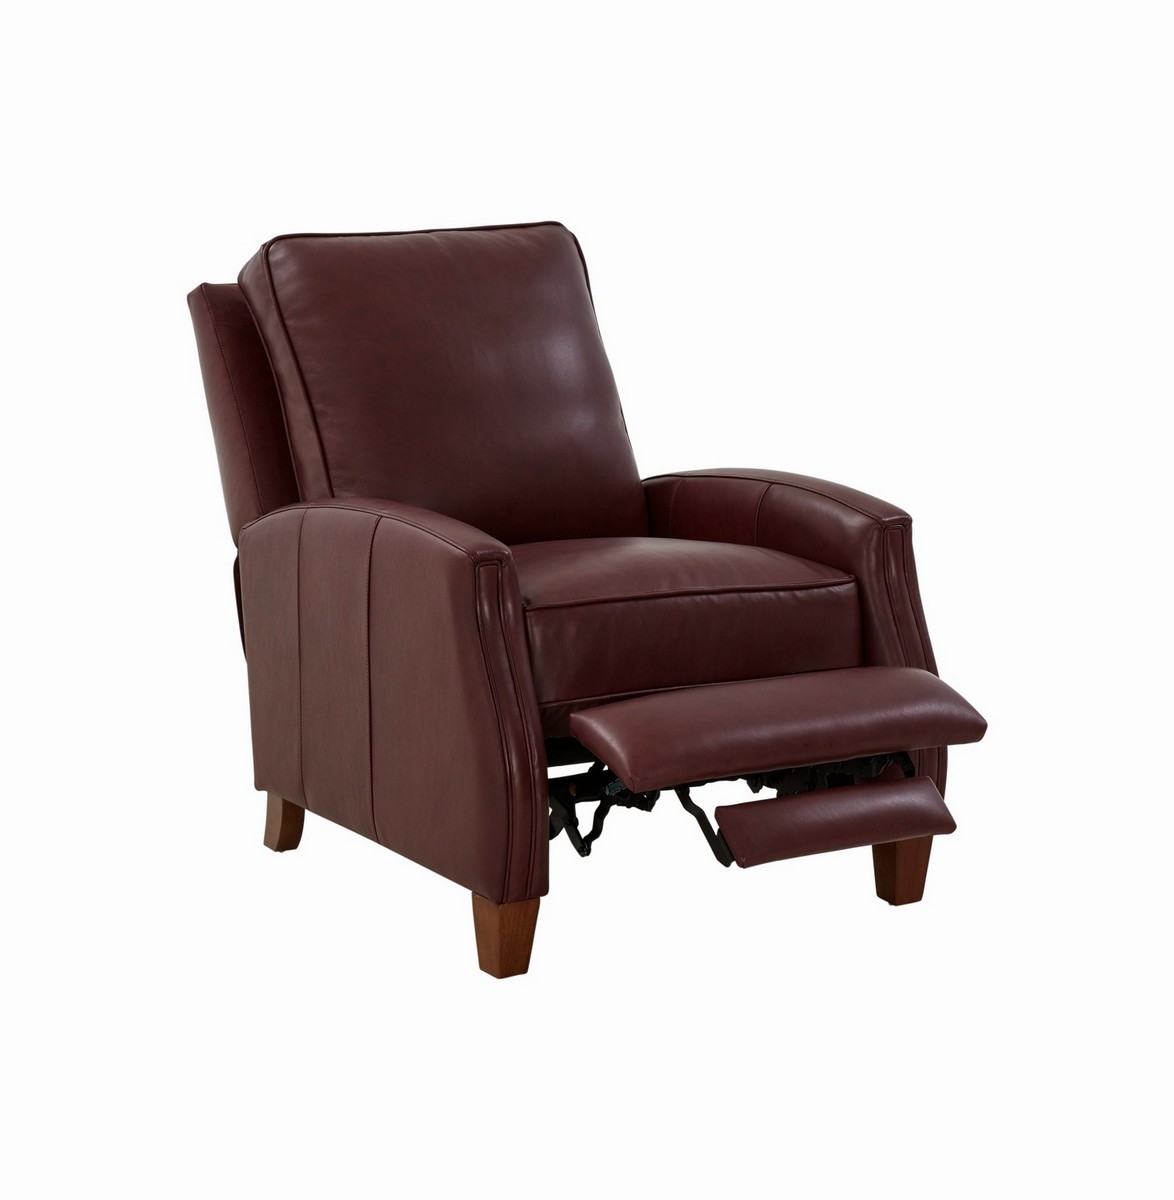 Barcalounger Penrose Recliner Chair - Shoreham Wine/All Leather